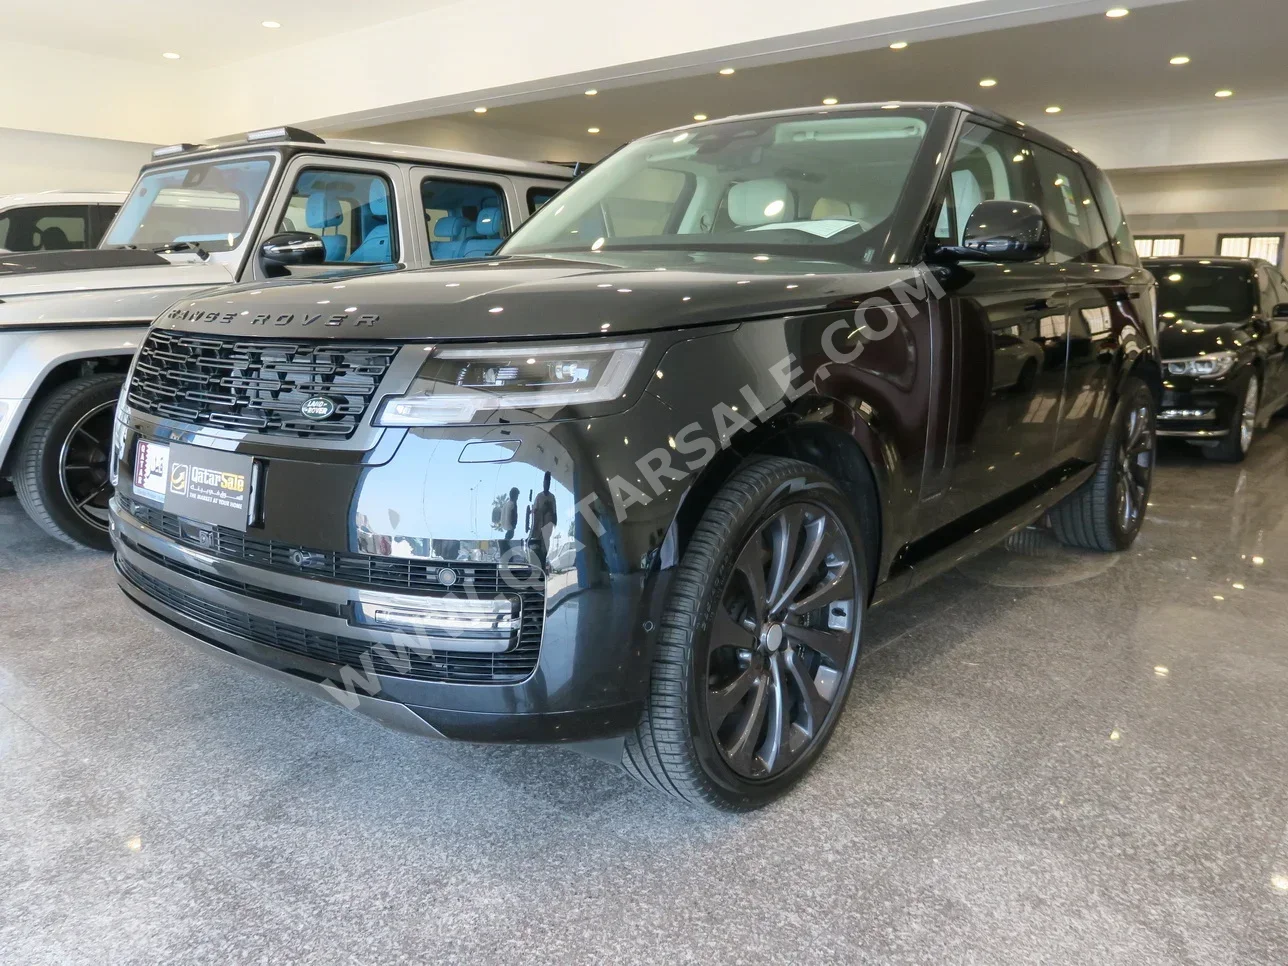 Land Rover  Range Rover  Vogue  Autobiography  2024  Automatic  0 Km  8 Cylinder  Four Wheel Drive (4WD)  SUV  Black  With Warranty